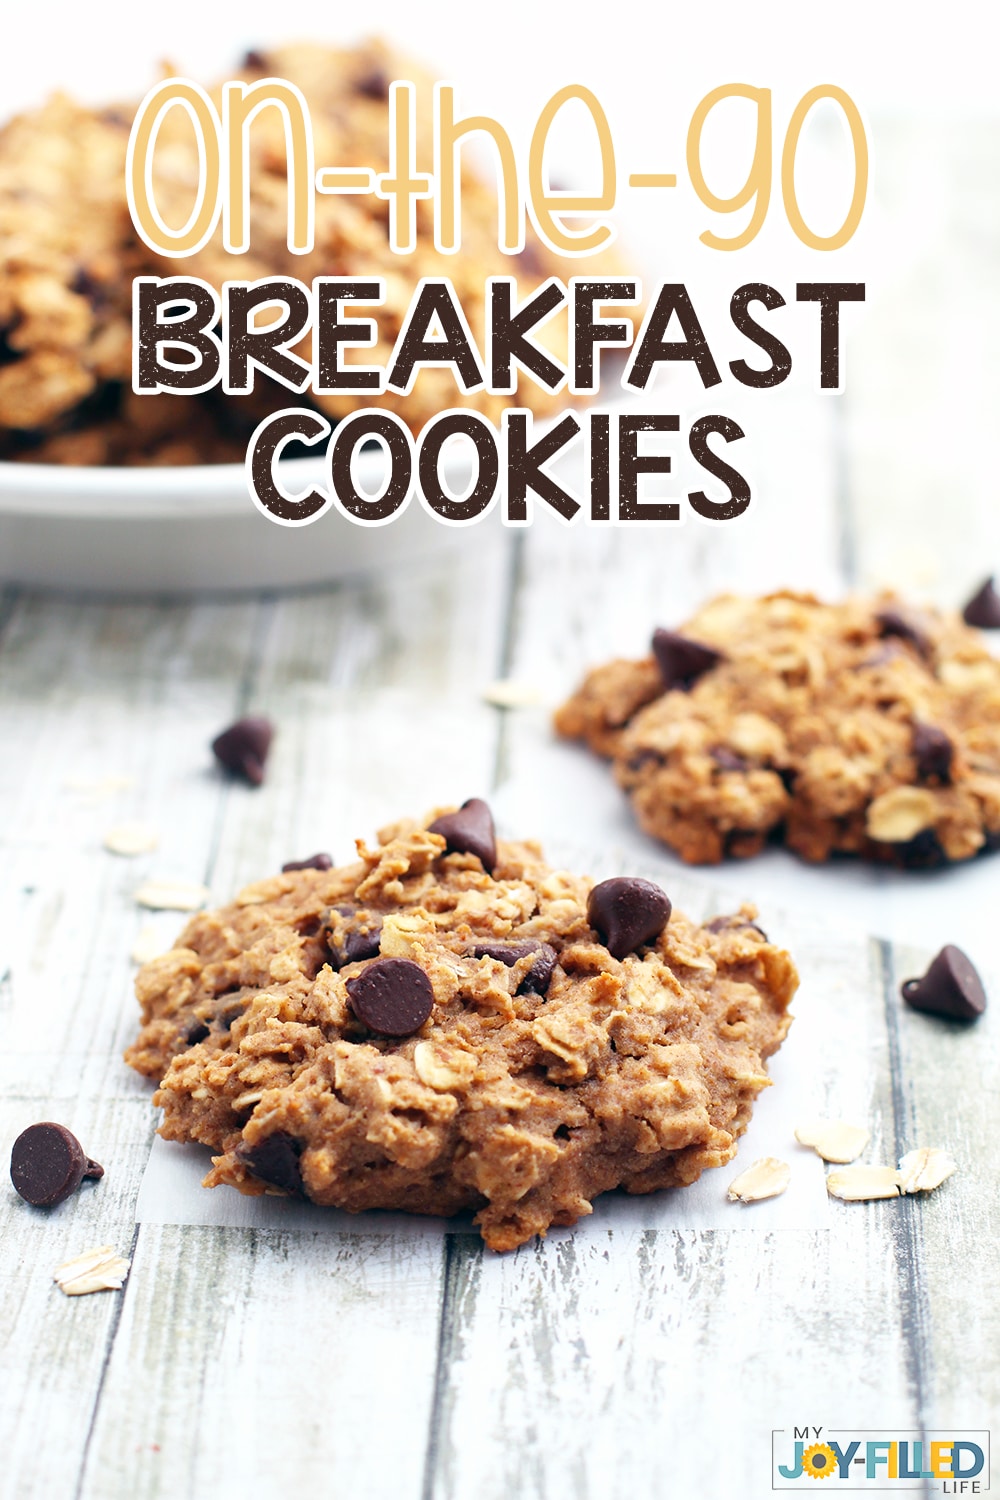 These breakfast cookies are perfect for busy mornings or as an after school snack! Easy, healthy, delicious, and even gluten free - and kids love them! #breakfast #breakfastcookies #easymeal #glutenfree